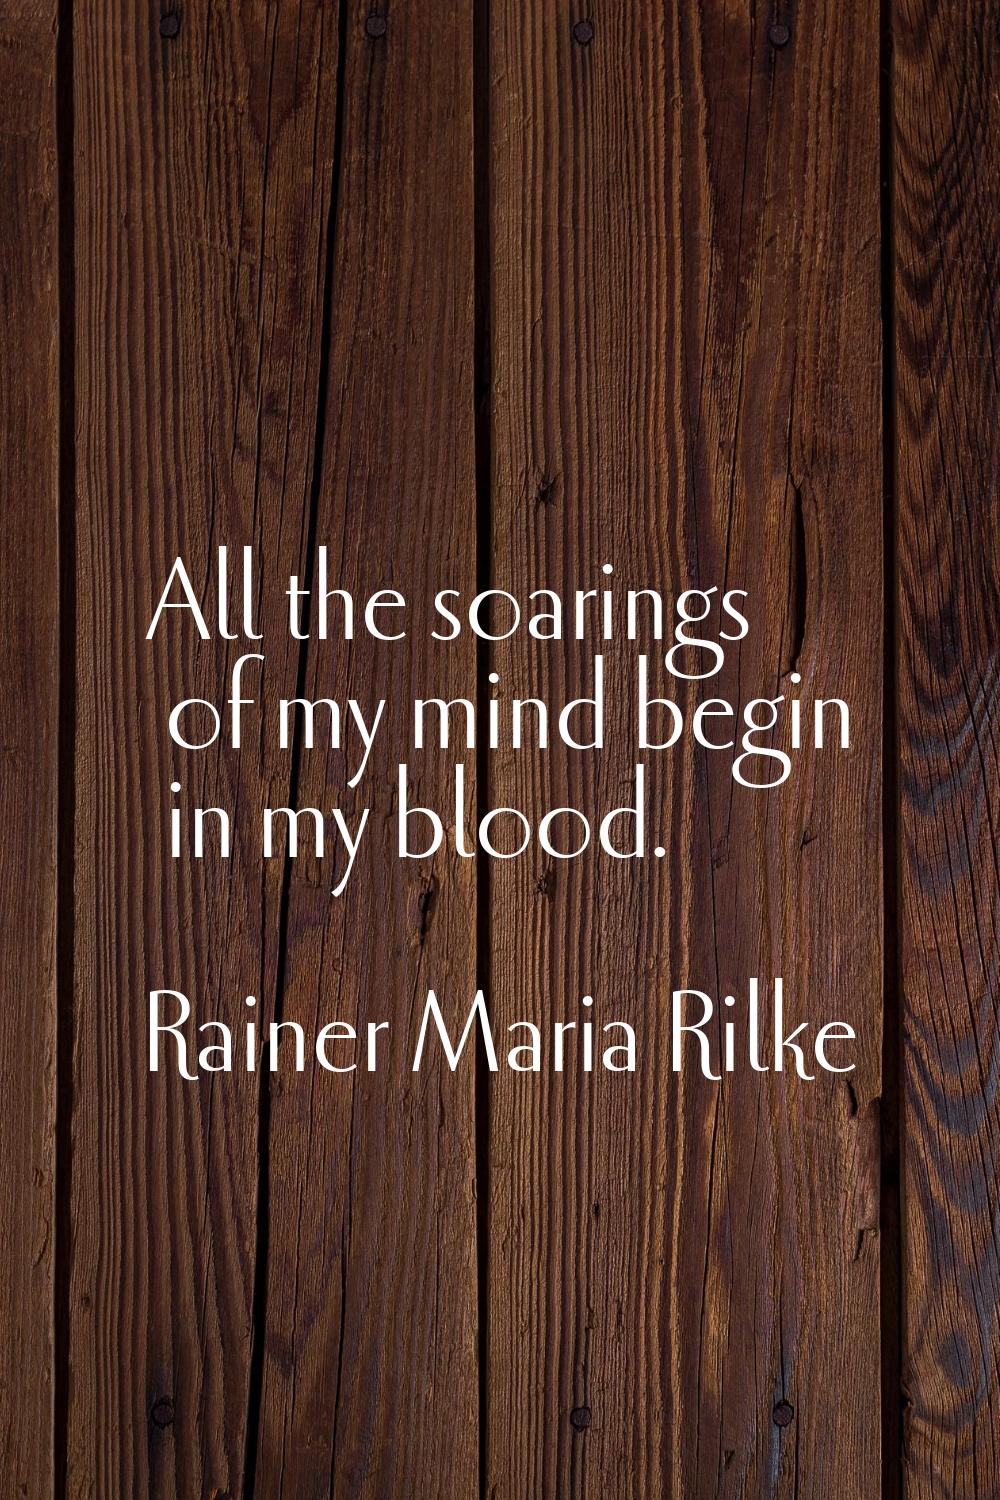 All the soarings of my mind begin in my blood.